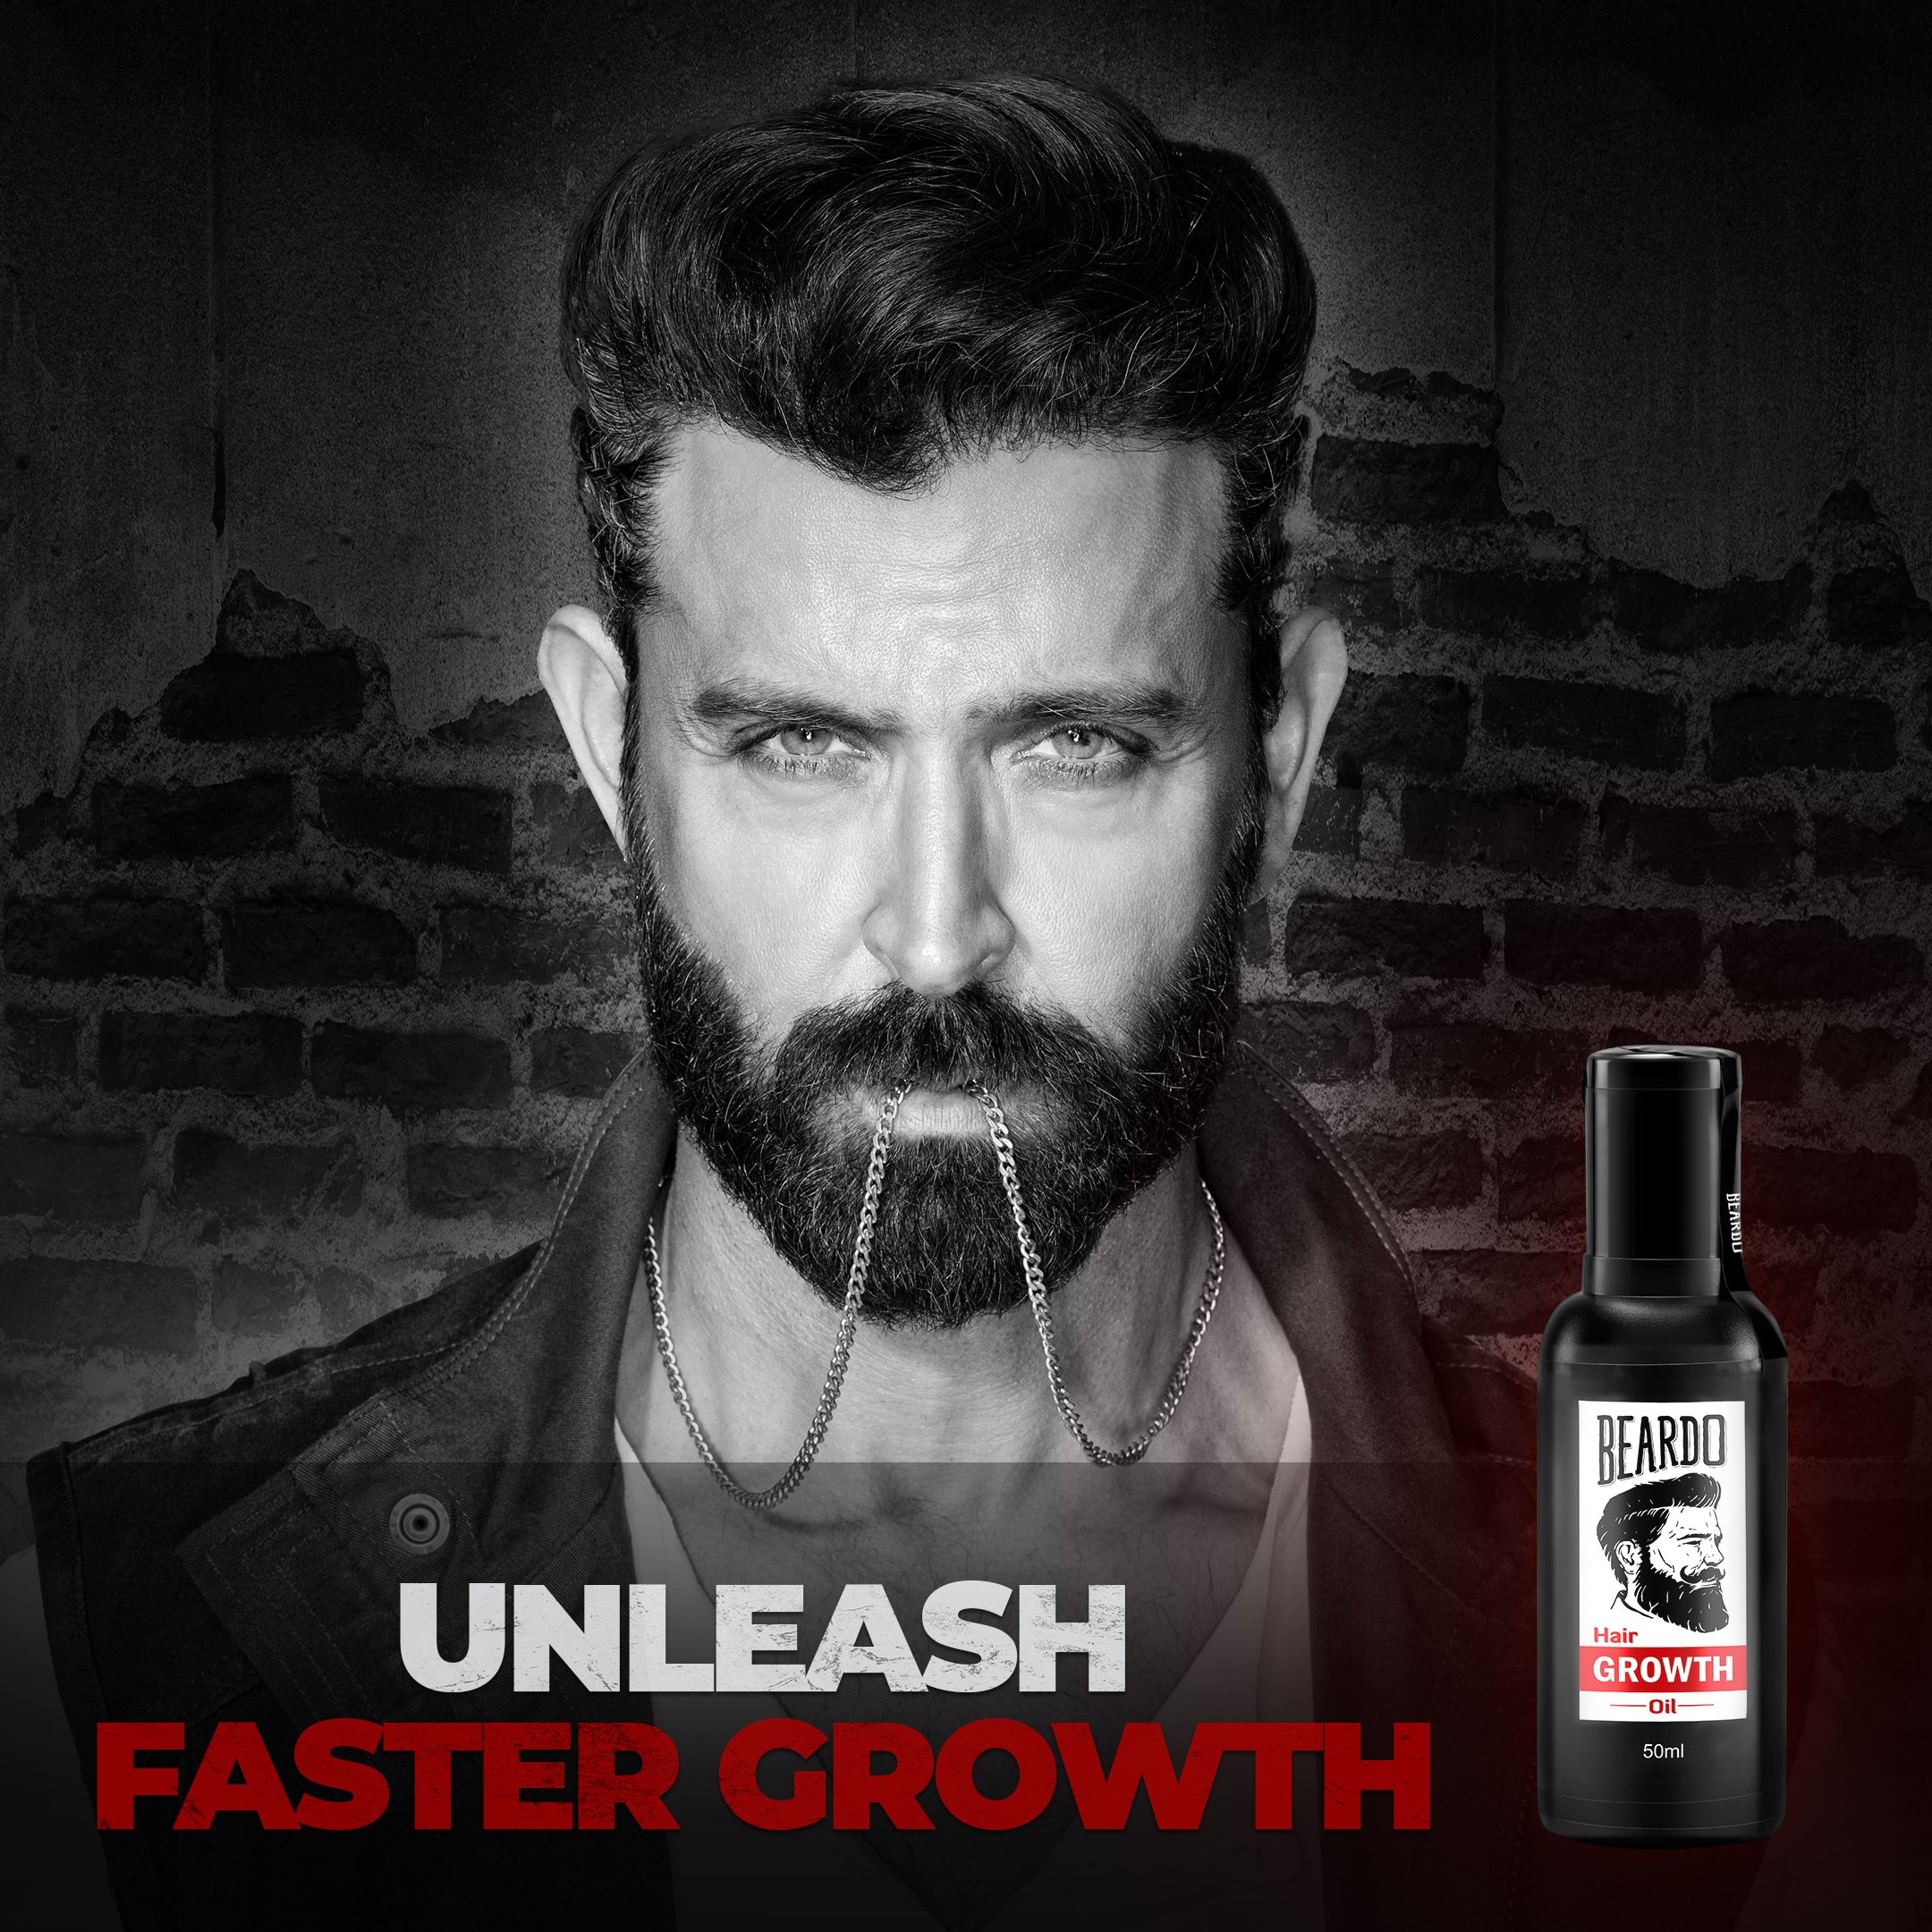 Buy Mamaearth Onion Beard Oil For Growing Beard Faster With Onion   Redensyl For Beard Growth 30ml Online at Low Prices in India  Amazonin